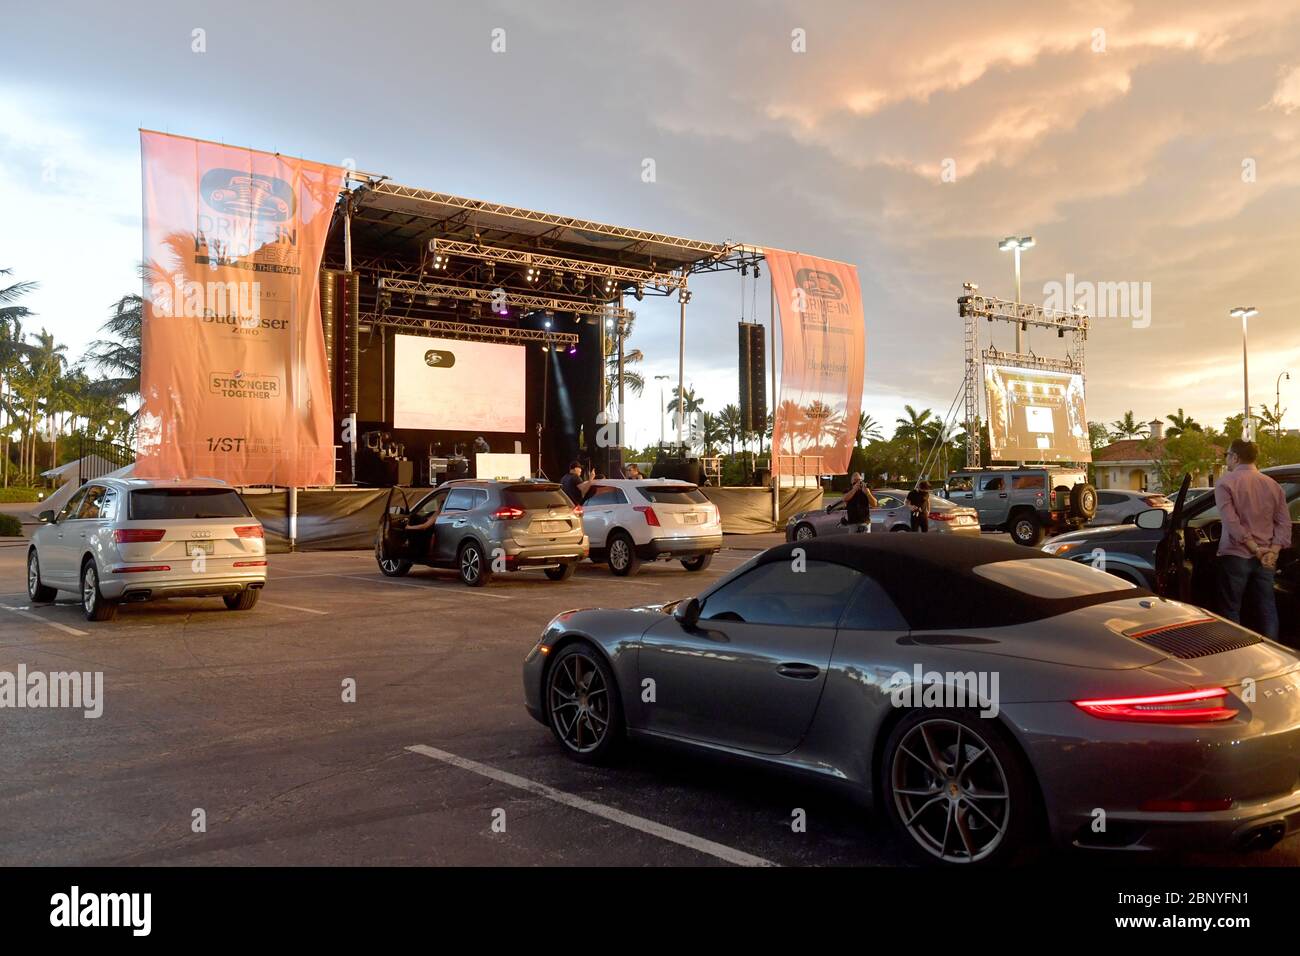 Hallandale, United States Of America. 16th May, 2020. HALLANDALE, FLORIDA - MAY 16: 1/ST Preakness at Home Drive-InFieldFest featuring live DJ set by D-Nice hosted by The Roots benefitting First Responders Children's Foundation on May 16, 2020 in Hallandale, Florida People: Atmosphere Credit: Storms Media Group/Alamy Live News Stock Photo